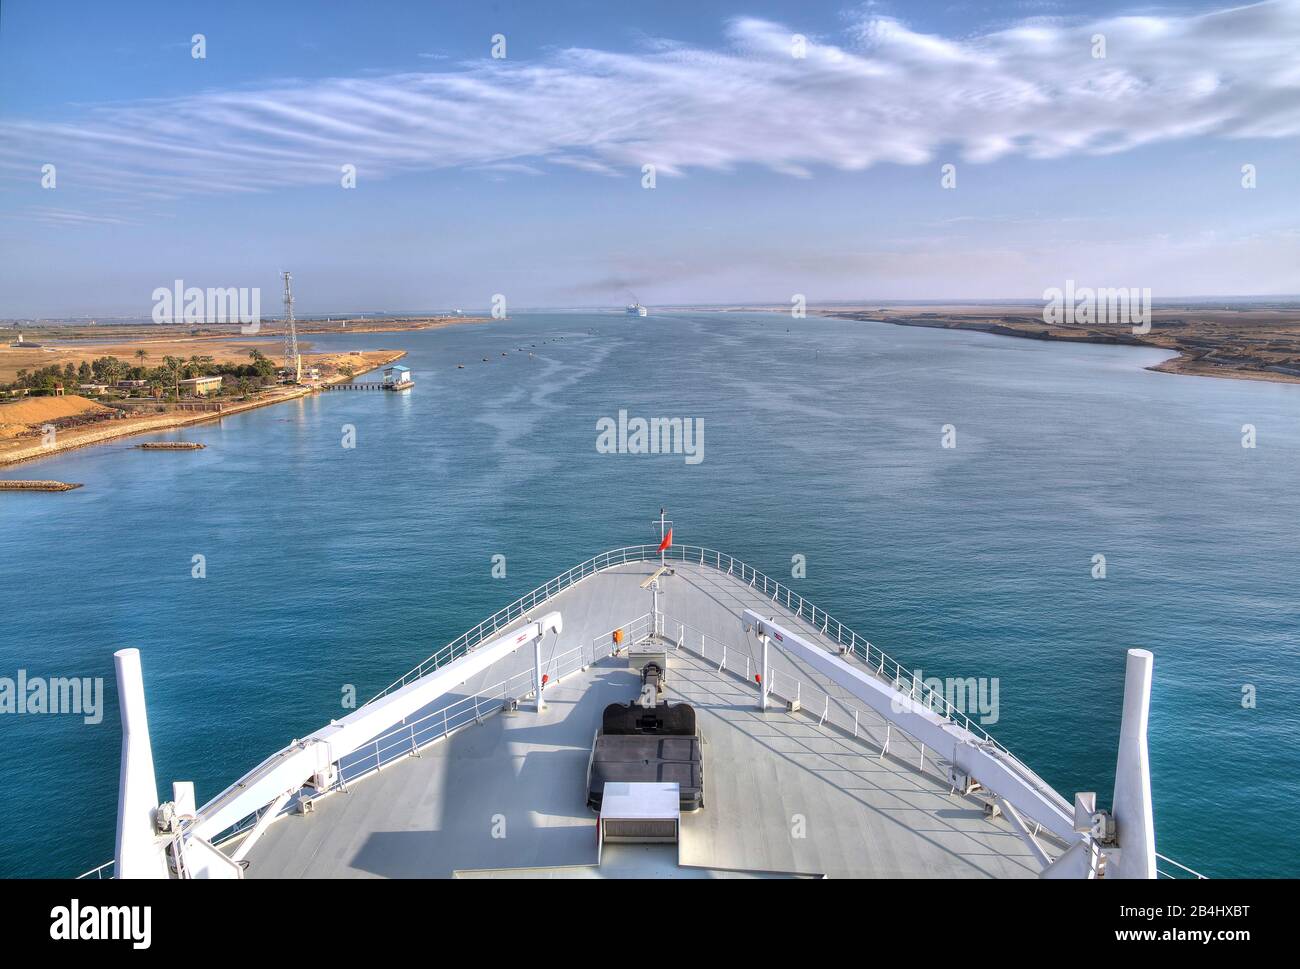 Bow foreship of the transatlantic liner Queen Mary 2 in the Suez Canal (Suez Canal) at the entrance to the Kleiner Bittersee, Egypt Stock Photo